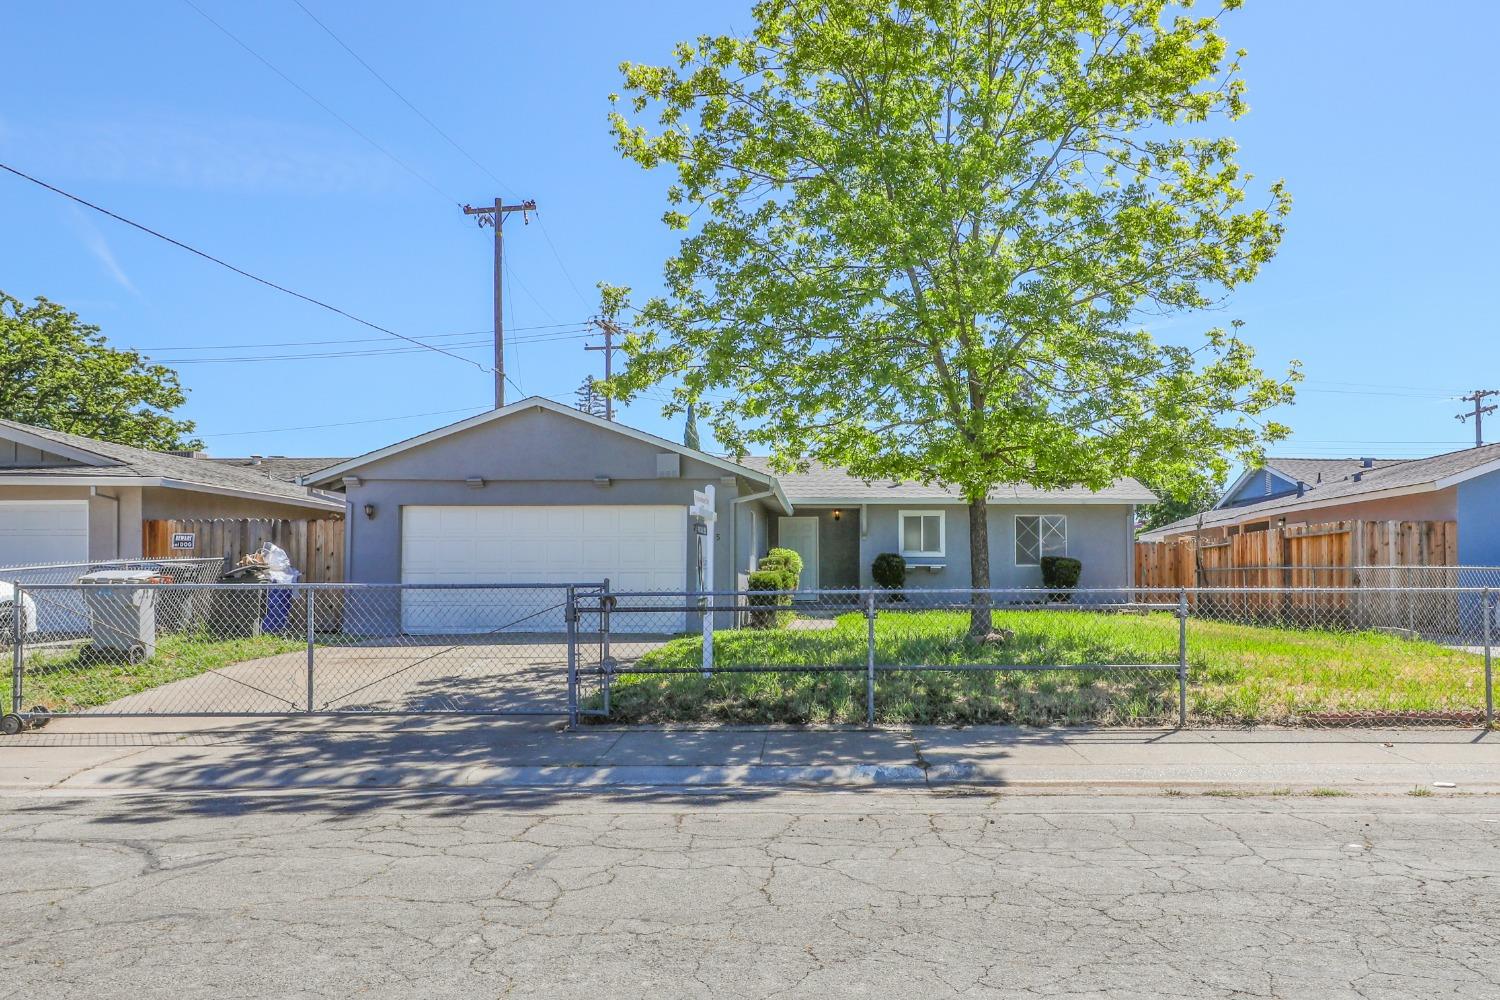 Photo of 7405 Troon Wy in Sacramento, CA